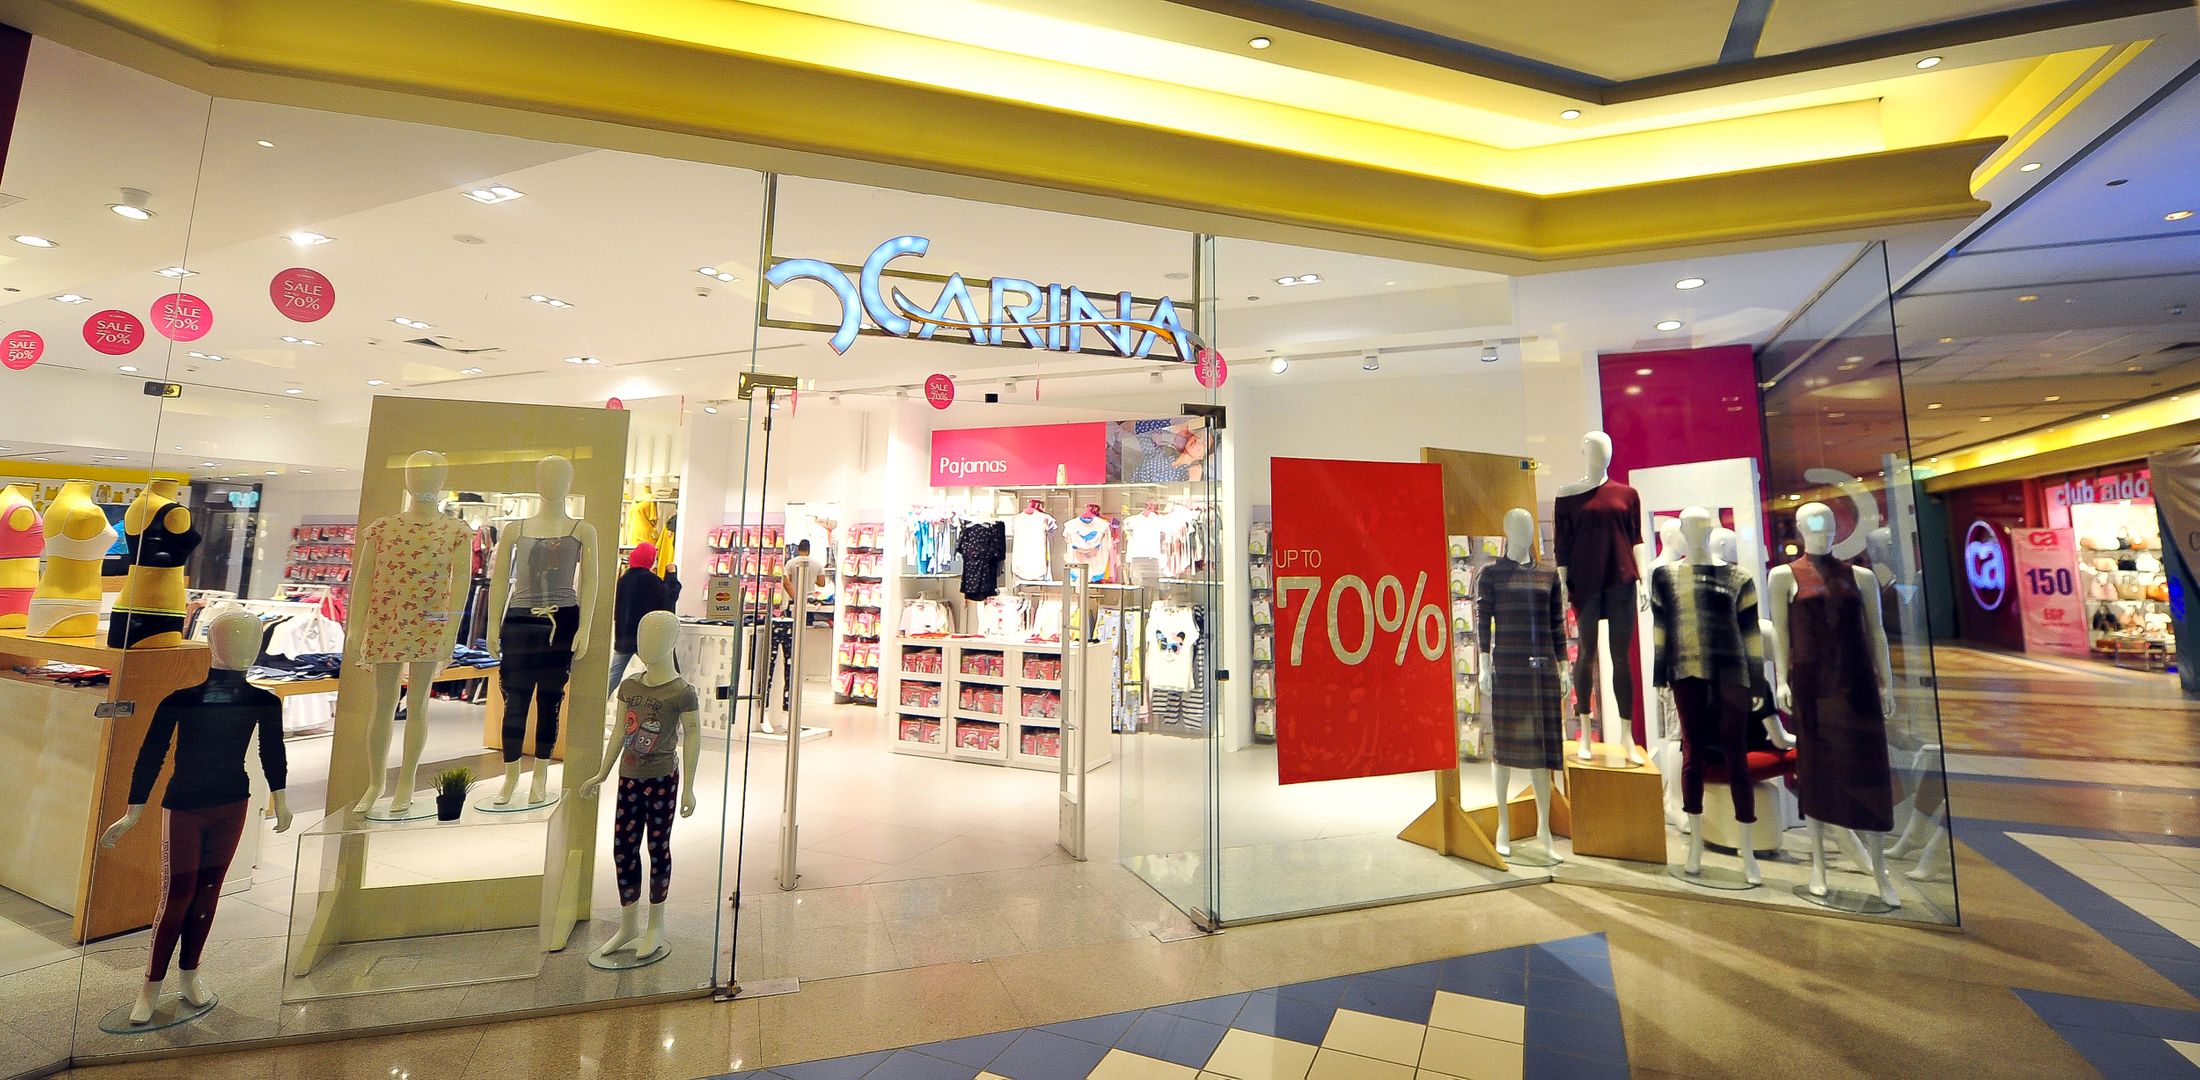 Citystars Shopping Mall. Over 750 luxurious stores.